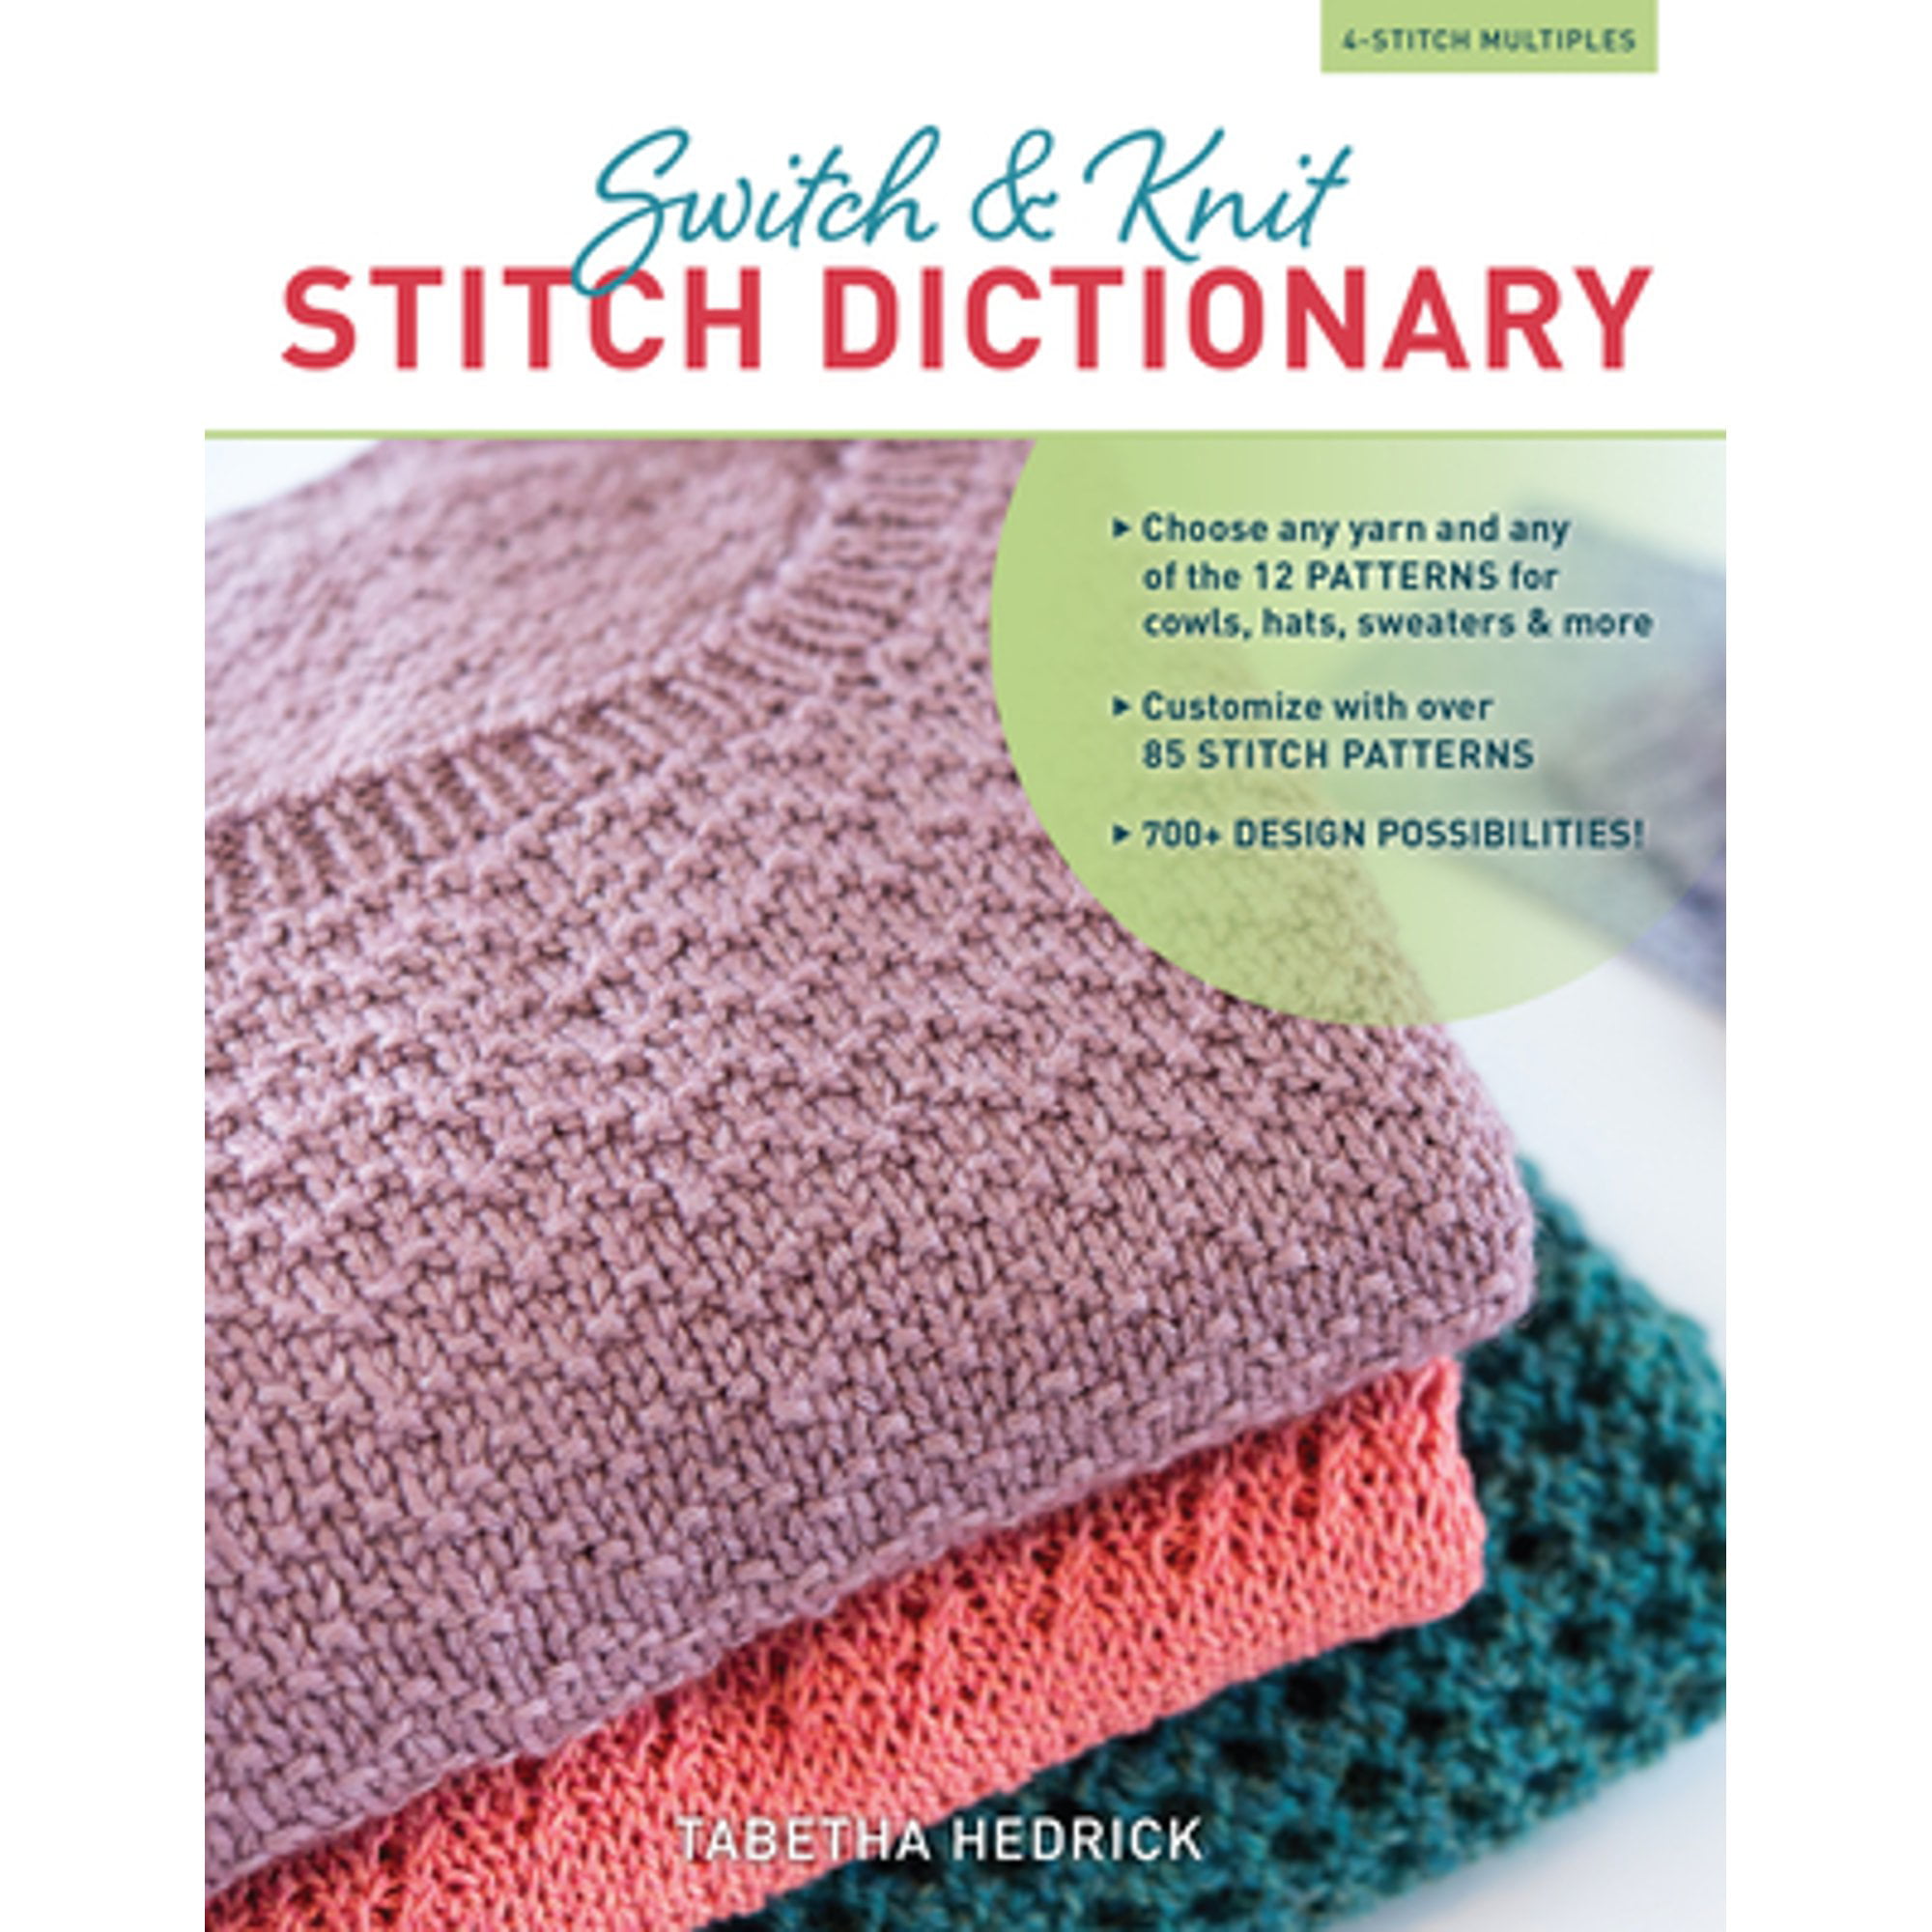 Leisure Arts Loom Knit Stitch Dictionary - Knitting Books and patterns Loom  Knit Stitch for beginners will expand your loom knitting skills with the